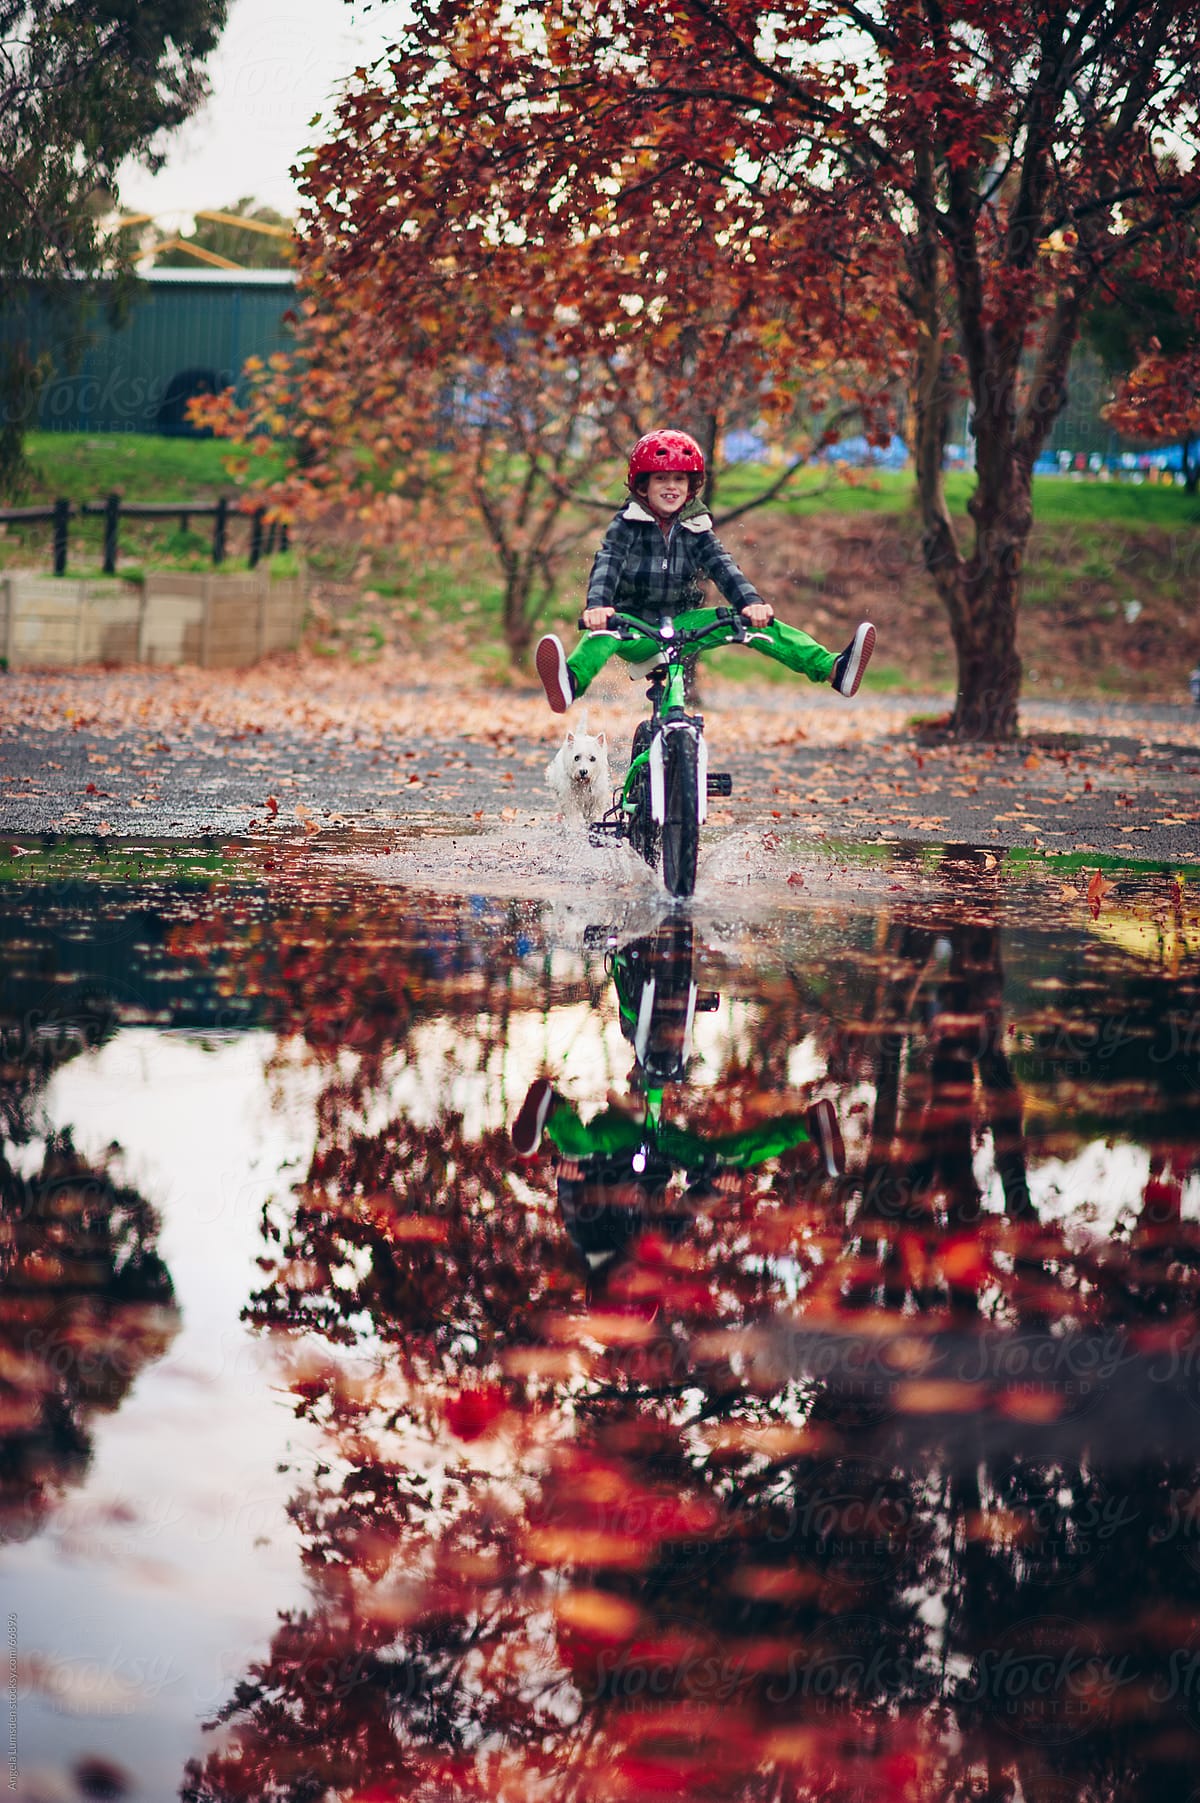 Boy riding a bike in a large puddle